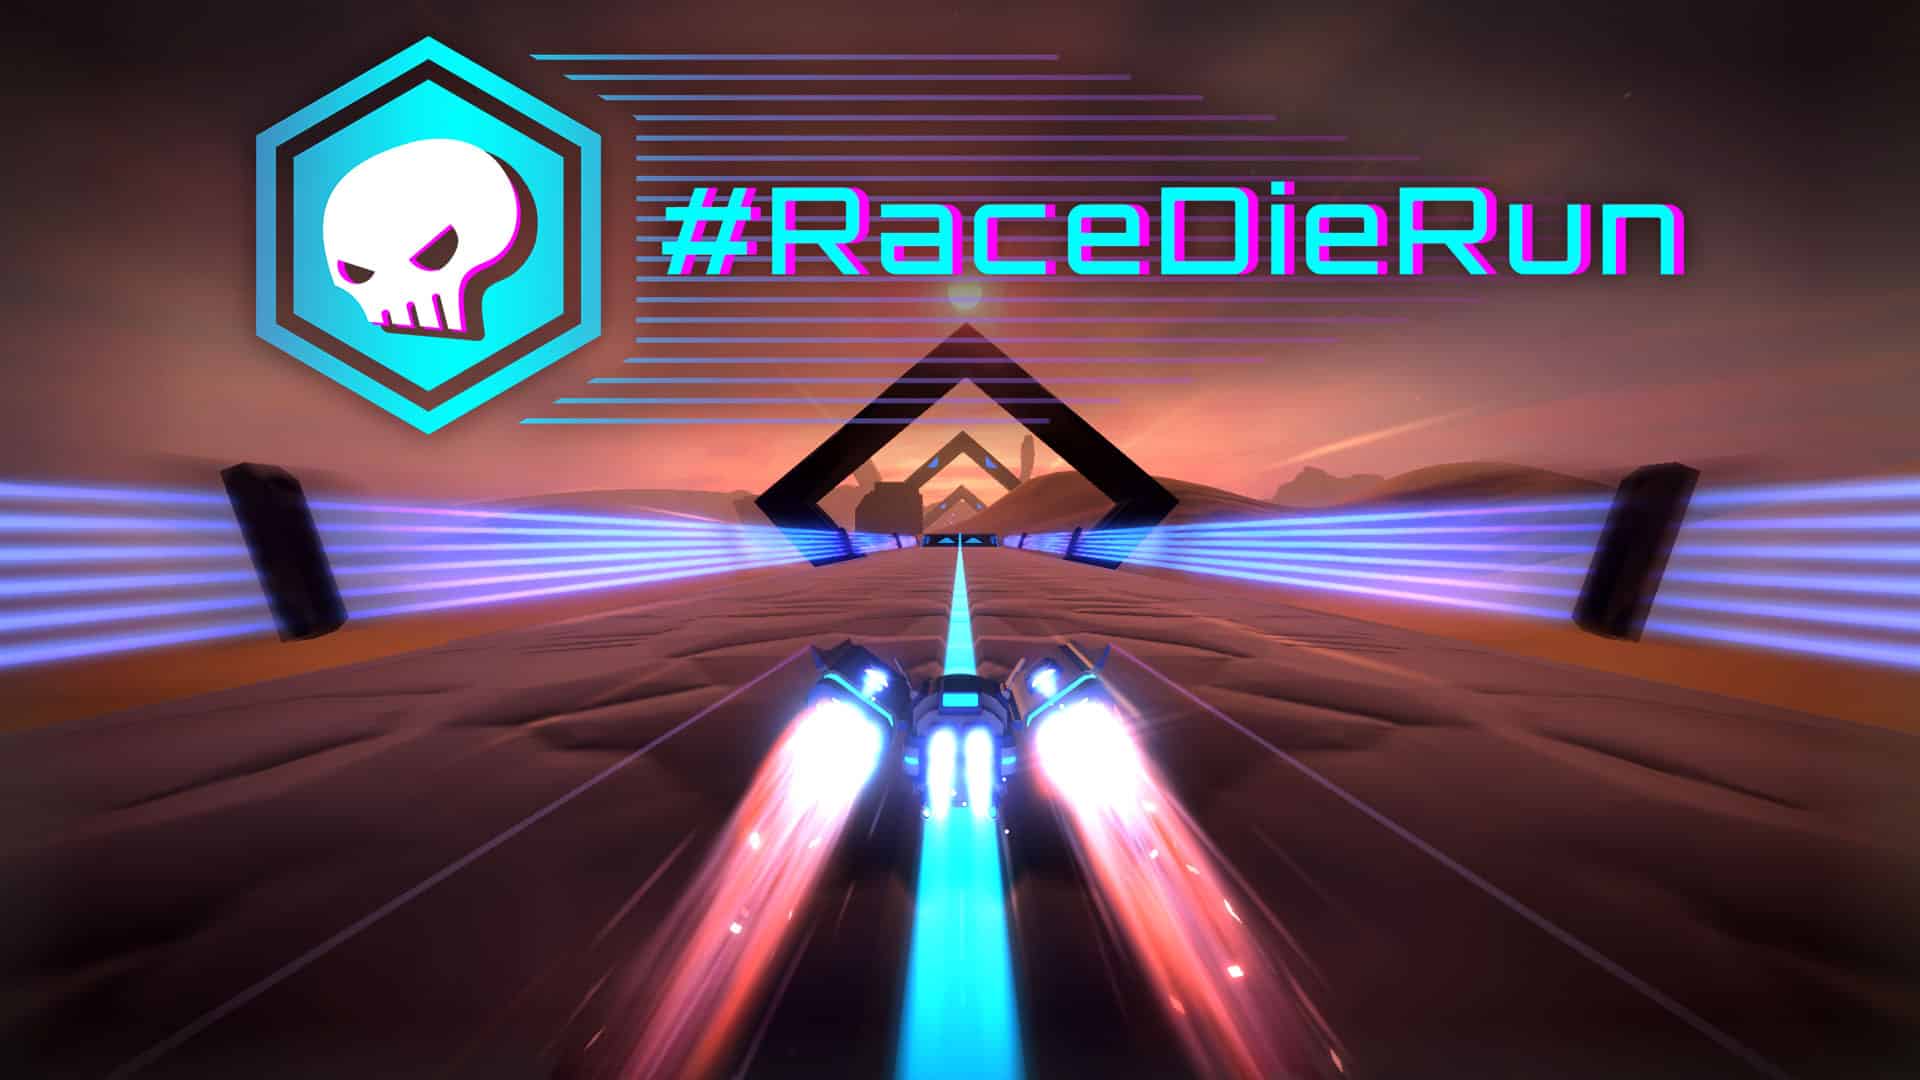 Race Die Run player count stats